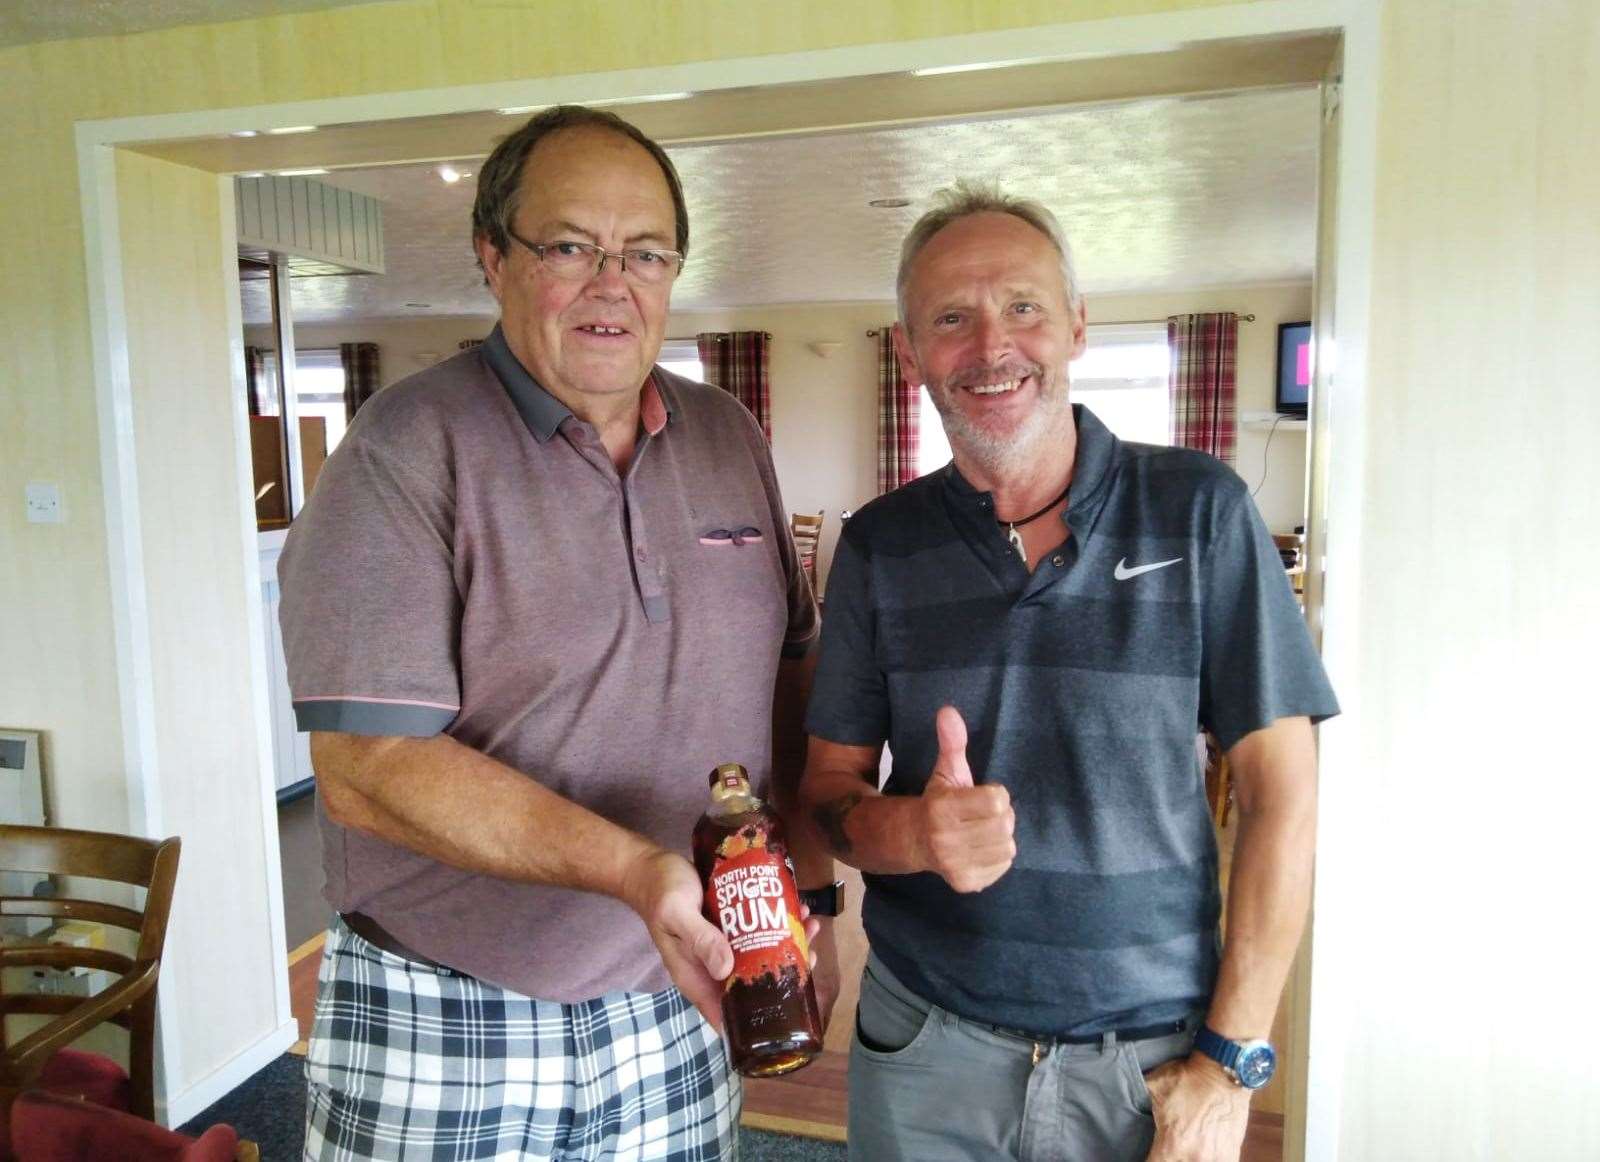 Mike Halliday handing a bottle of North Point Spiced Rum to Donald Mowat (right) after the latter won the nearest-the-pin prize at the Senior Stableford competition last week.